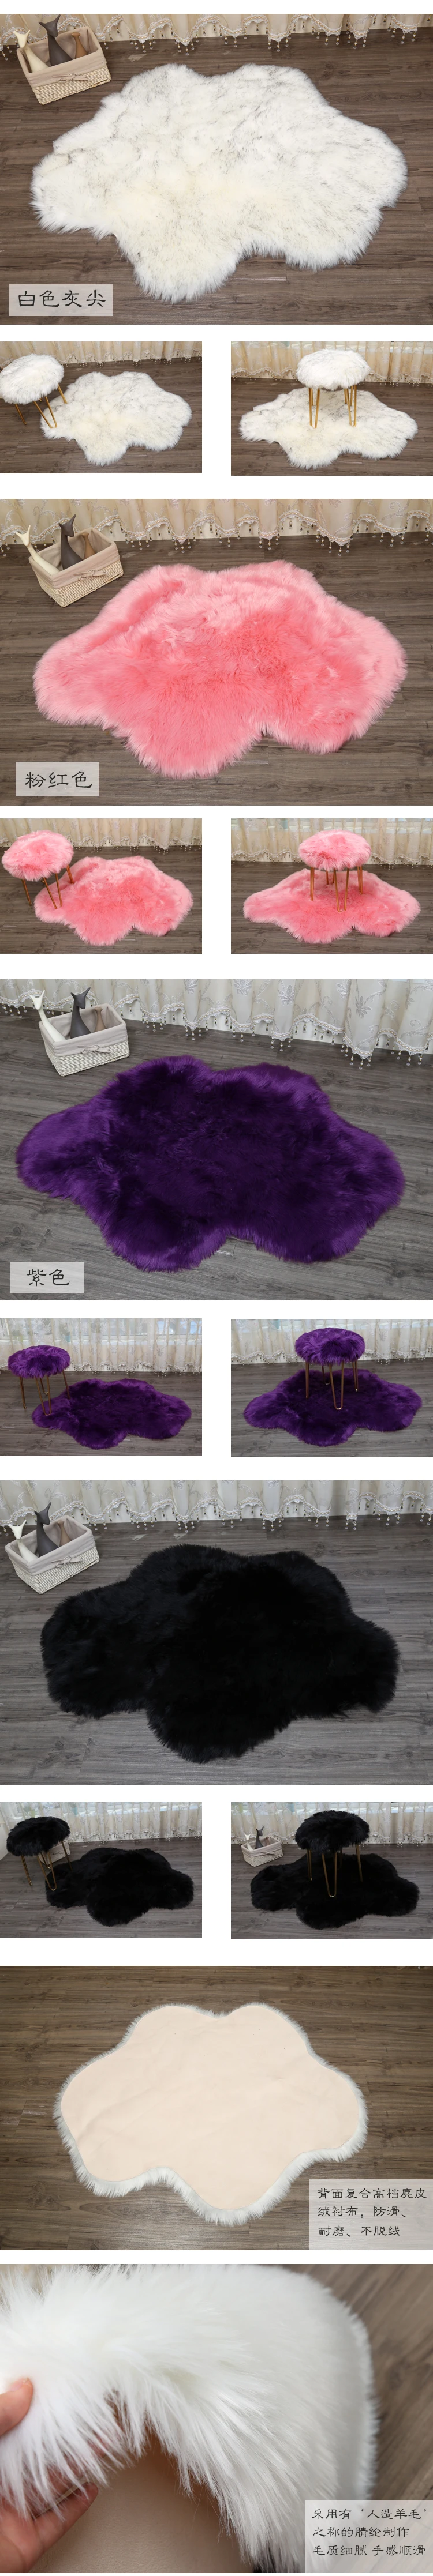 new cloud shape Sheepskin Rug Chair Cover Bedroom Mat Artificial Wool Warm Hairy Carpet Seat Warm Textil Fur Area Rugs